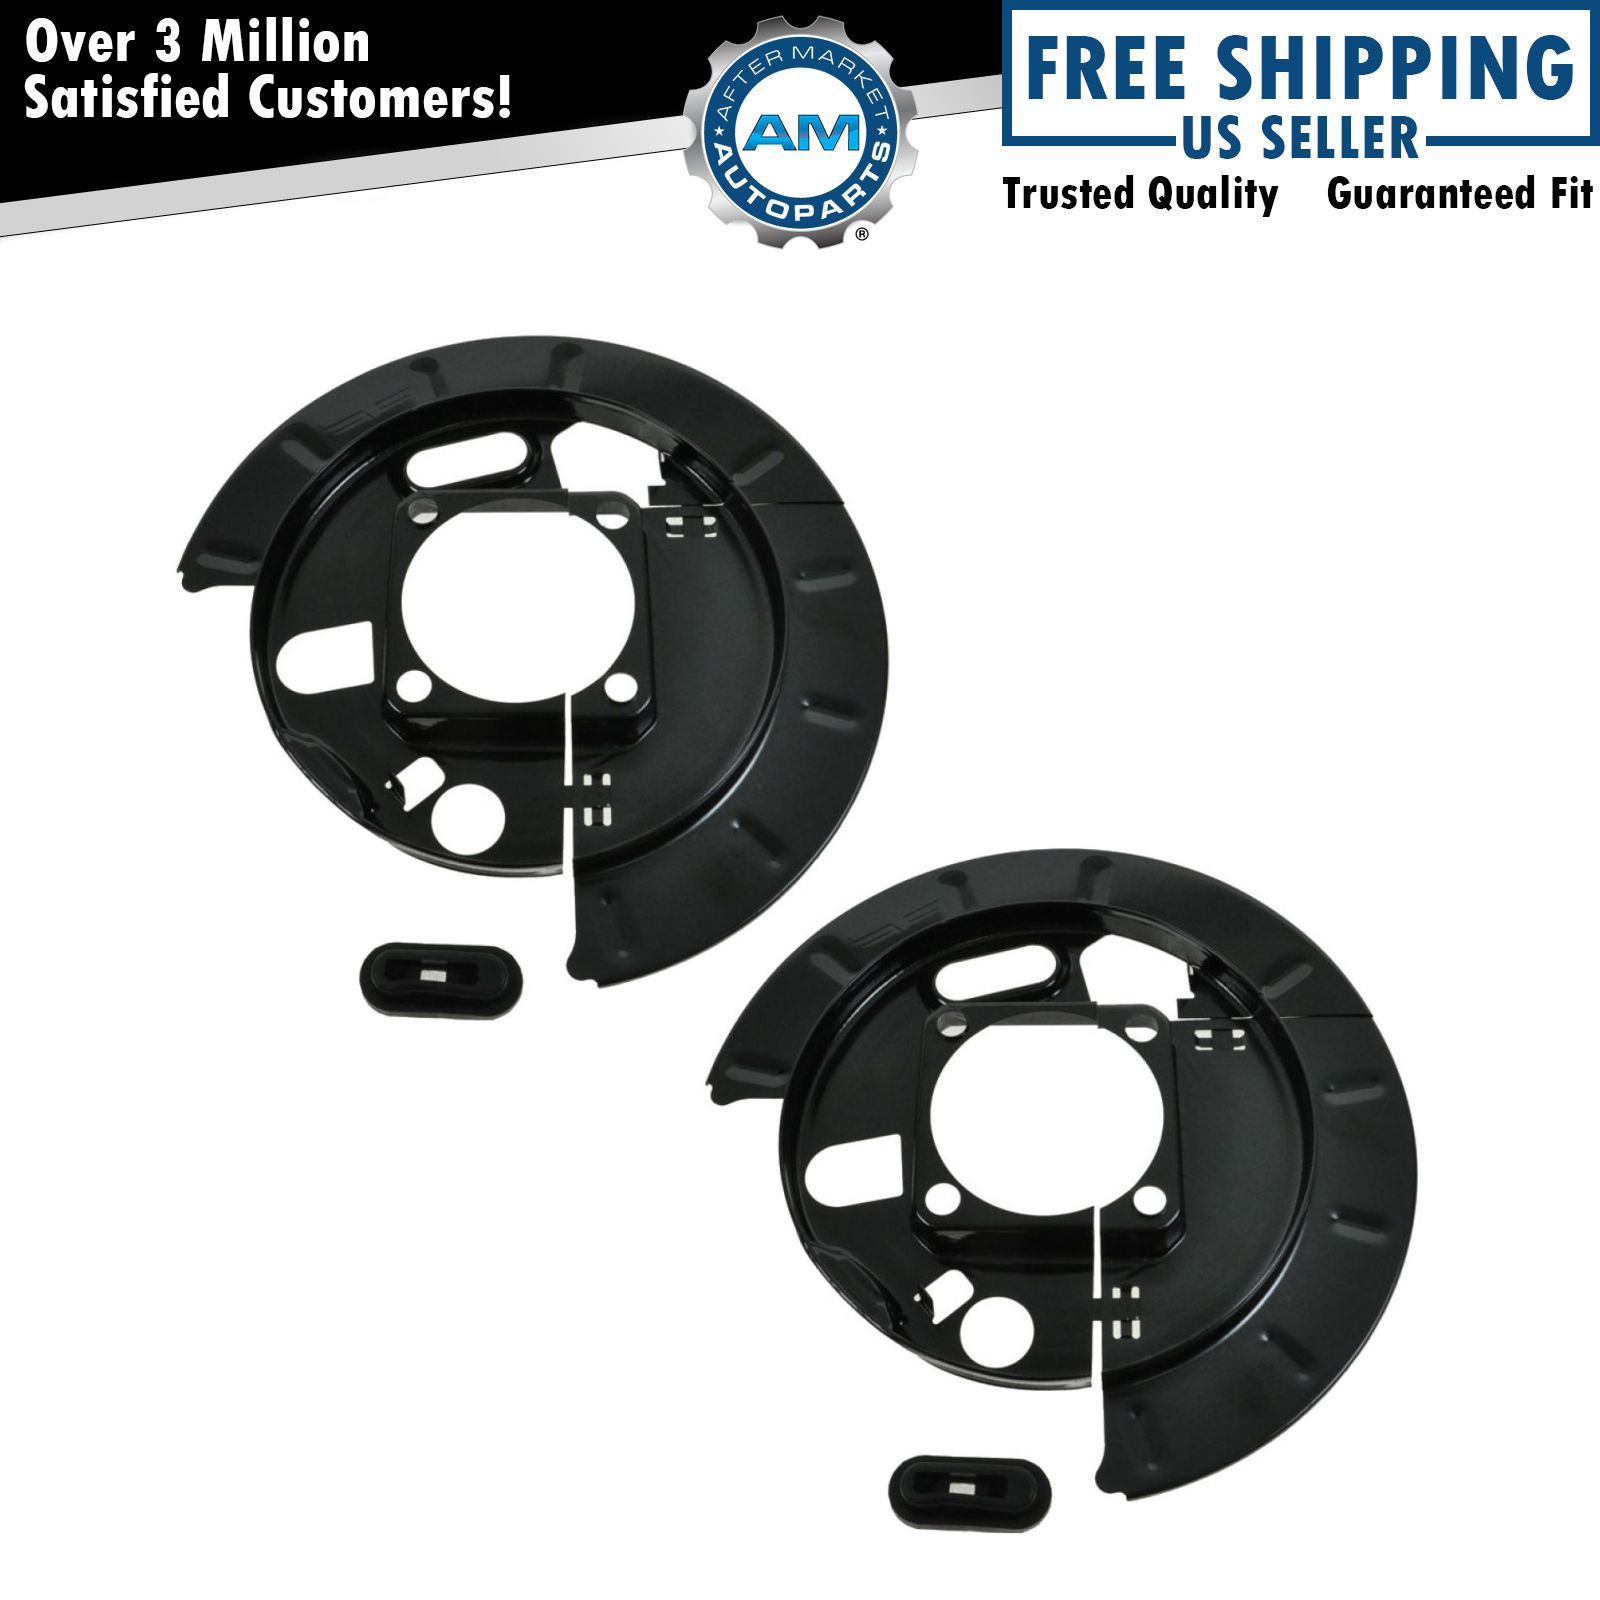 Dorman 2 Piece Rear Disc Brake Backing Plate Pair for Chevy GMC Pickup Truck